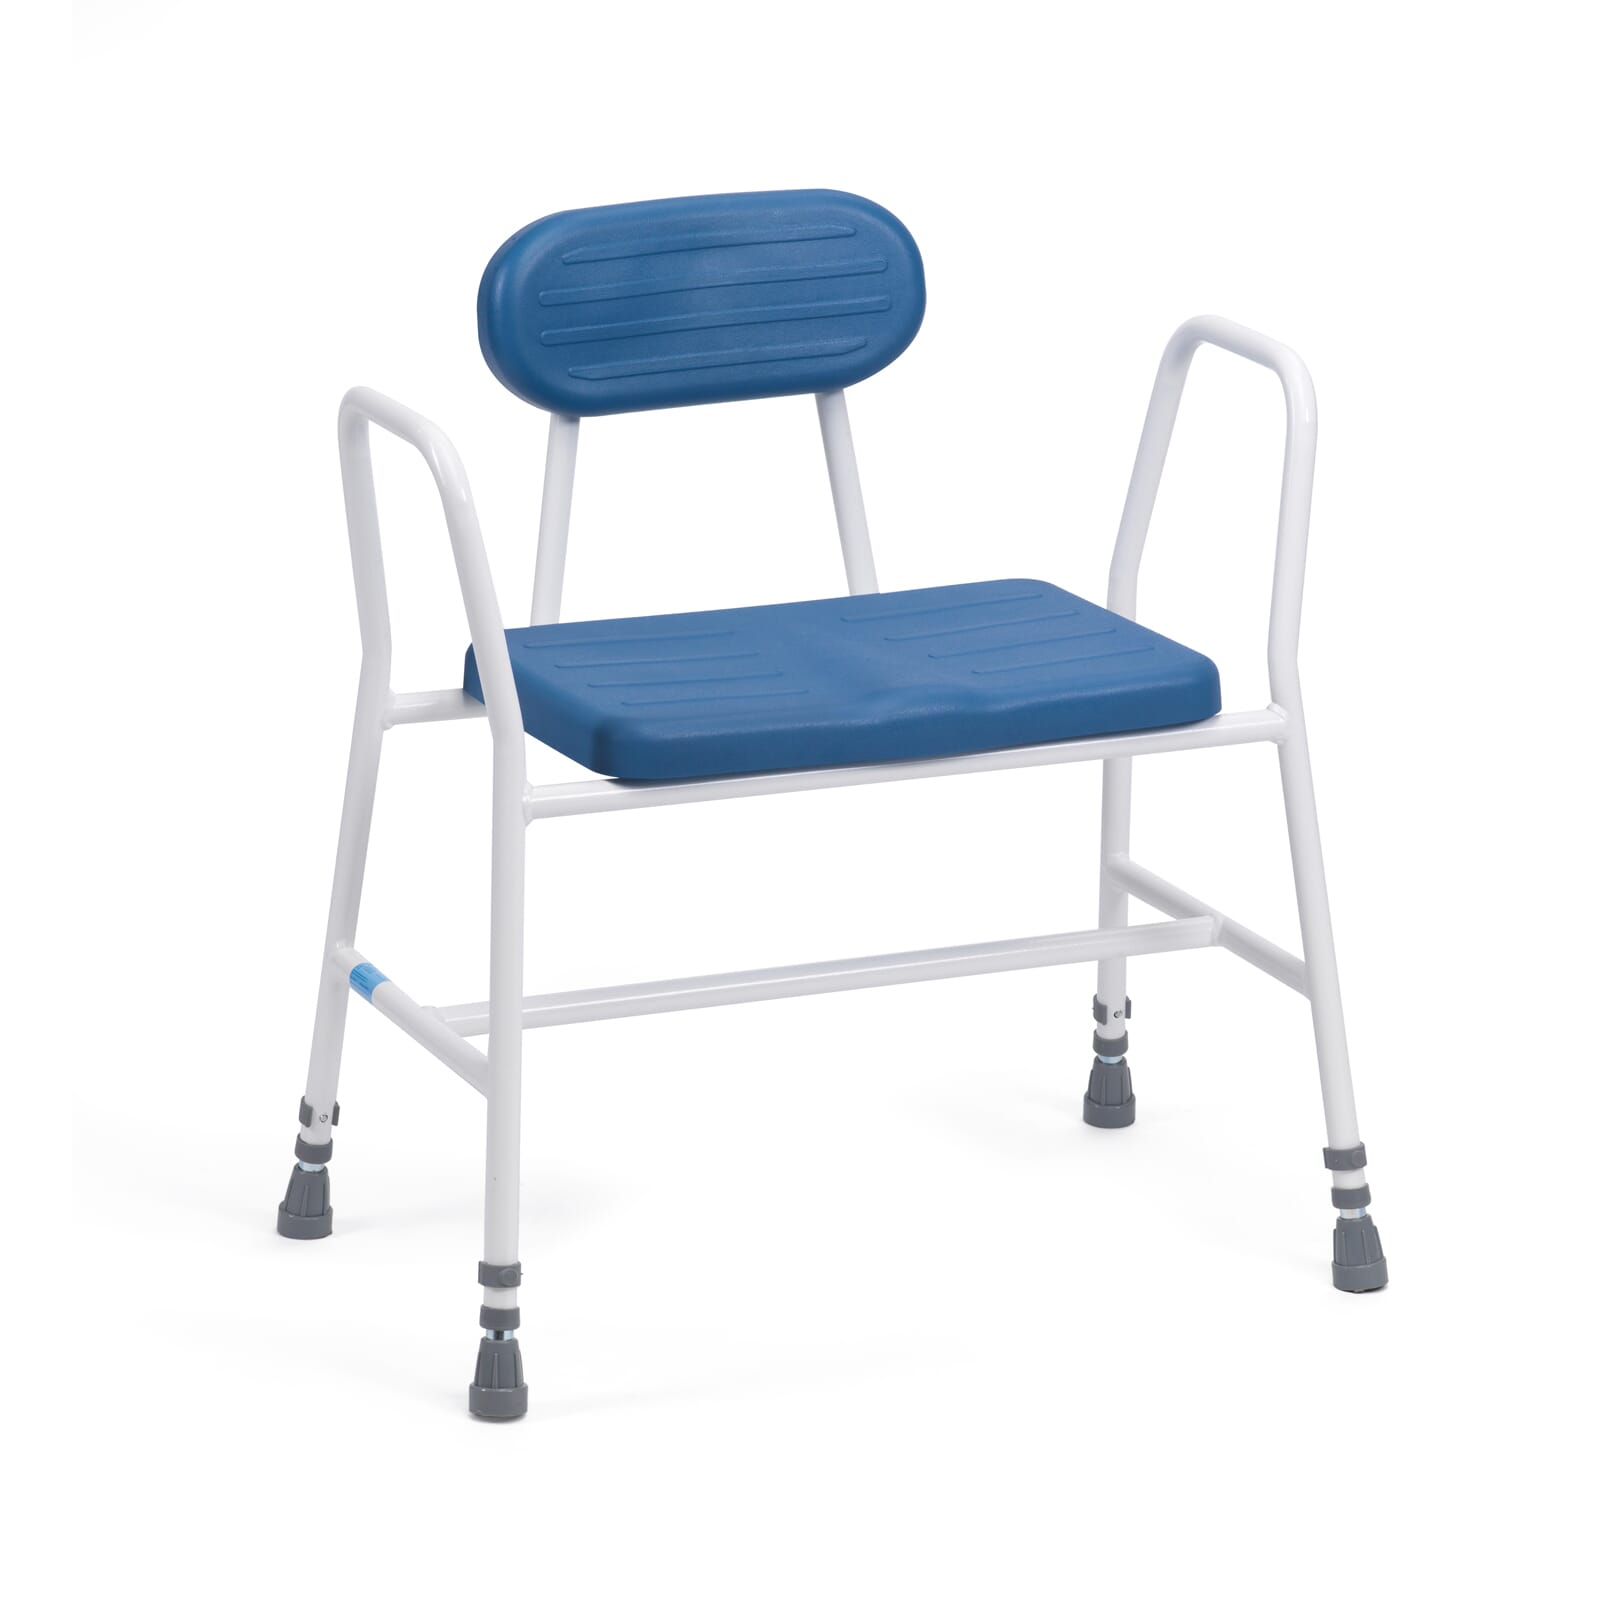 View PU Bariatric Perching Kitchen Stool Tubular Arms and Padded Back information